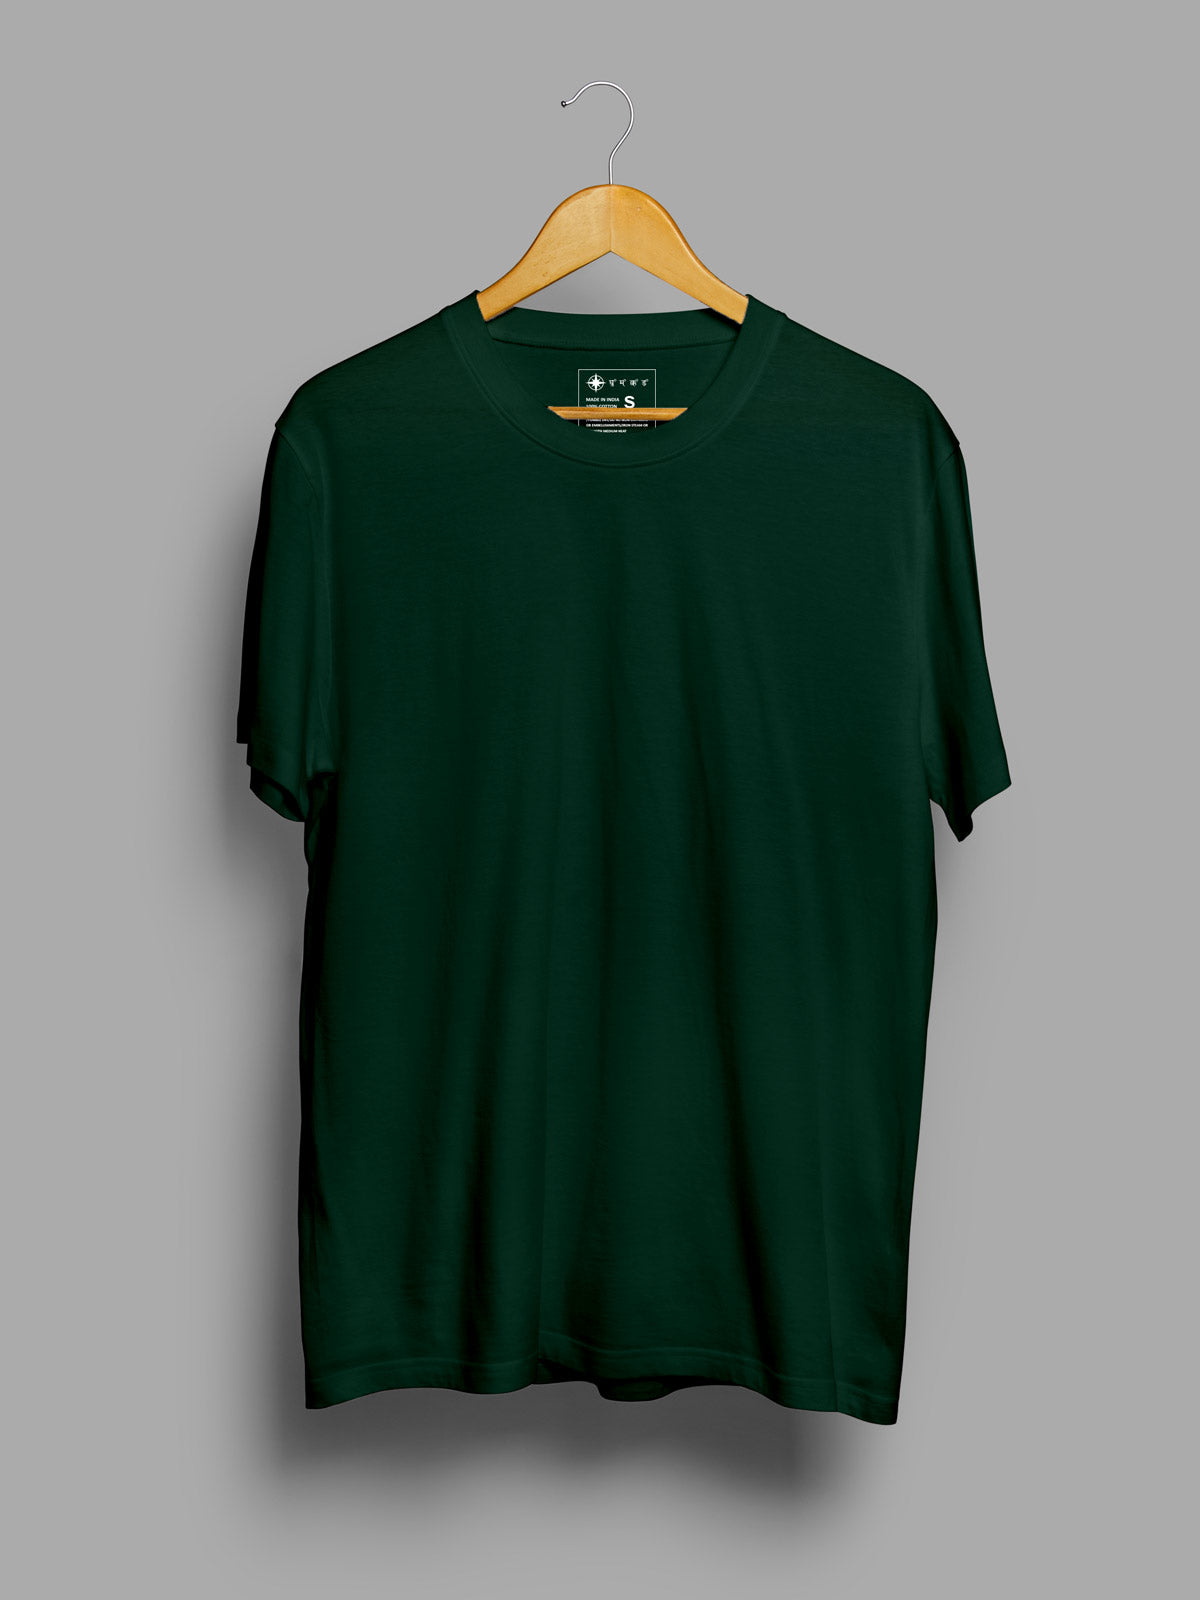 Forest-Green-t-shirt-for-men by Ghumakkad